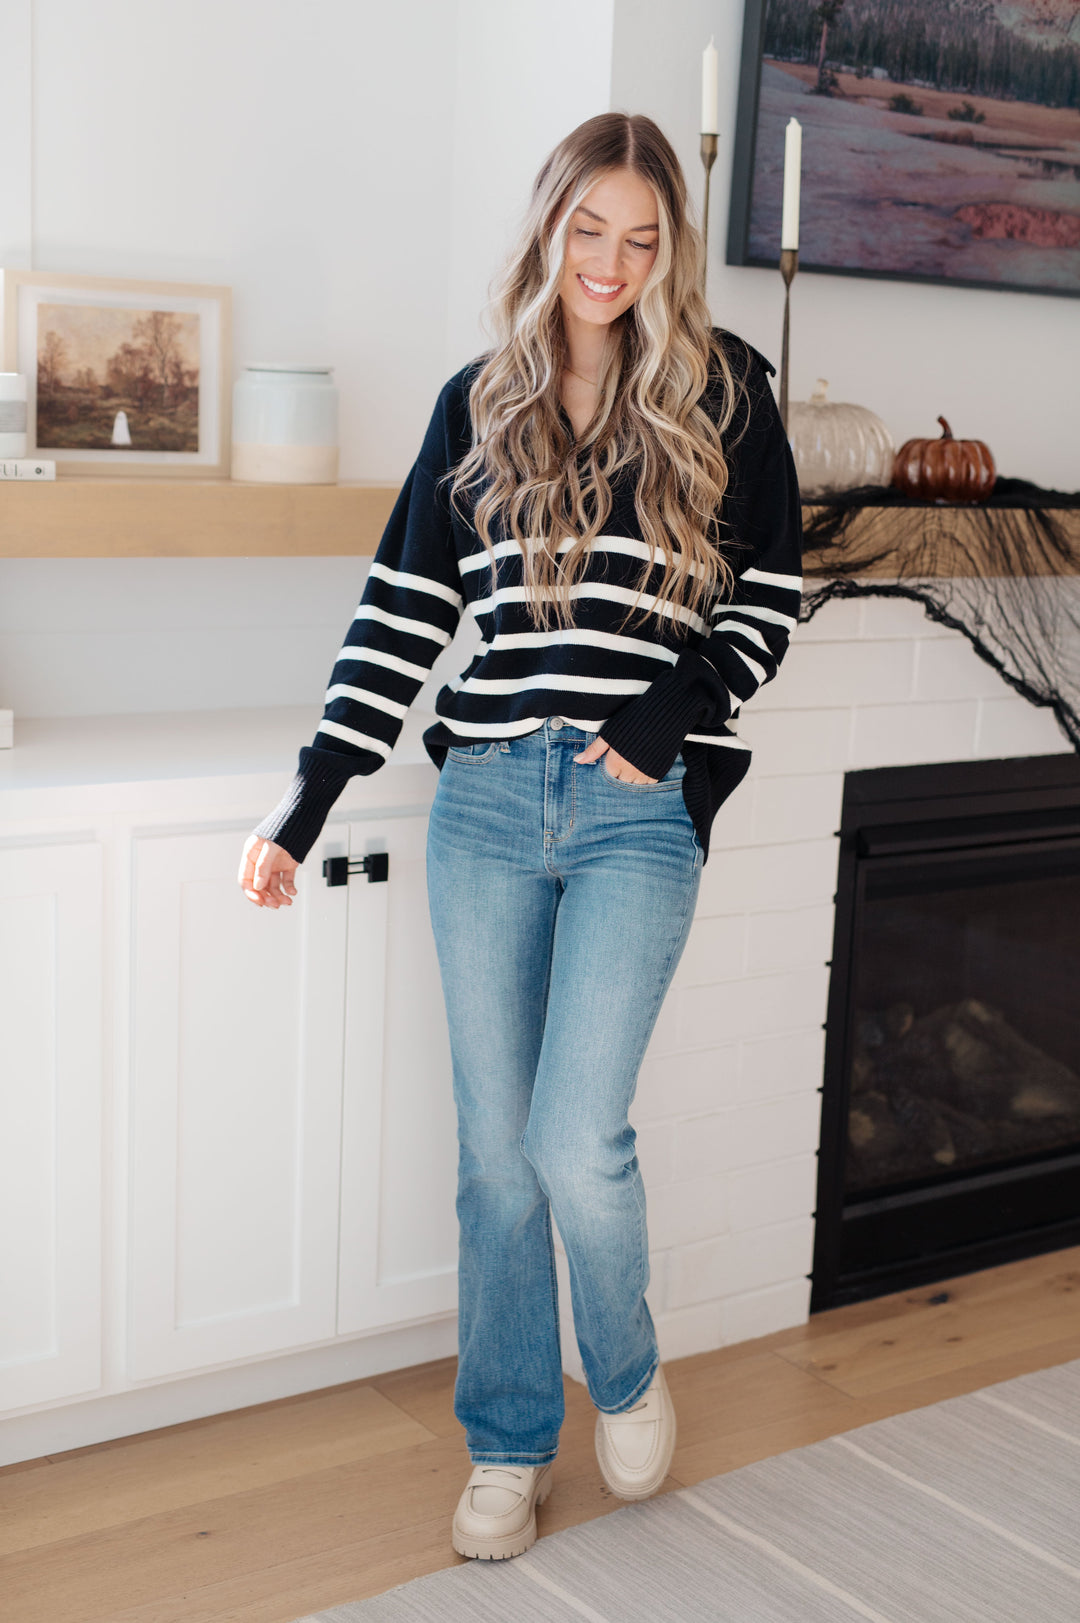 From Here On Out Striped Sweater-Sweaters/Sweatshirts-Inspired by Justeen-Women's Clothing Boutique in Chicago, Illinois